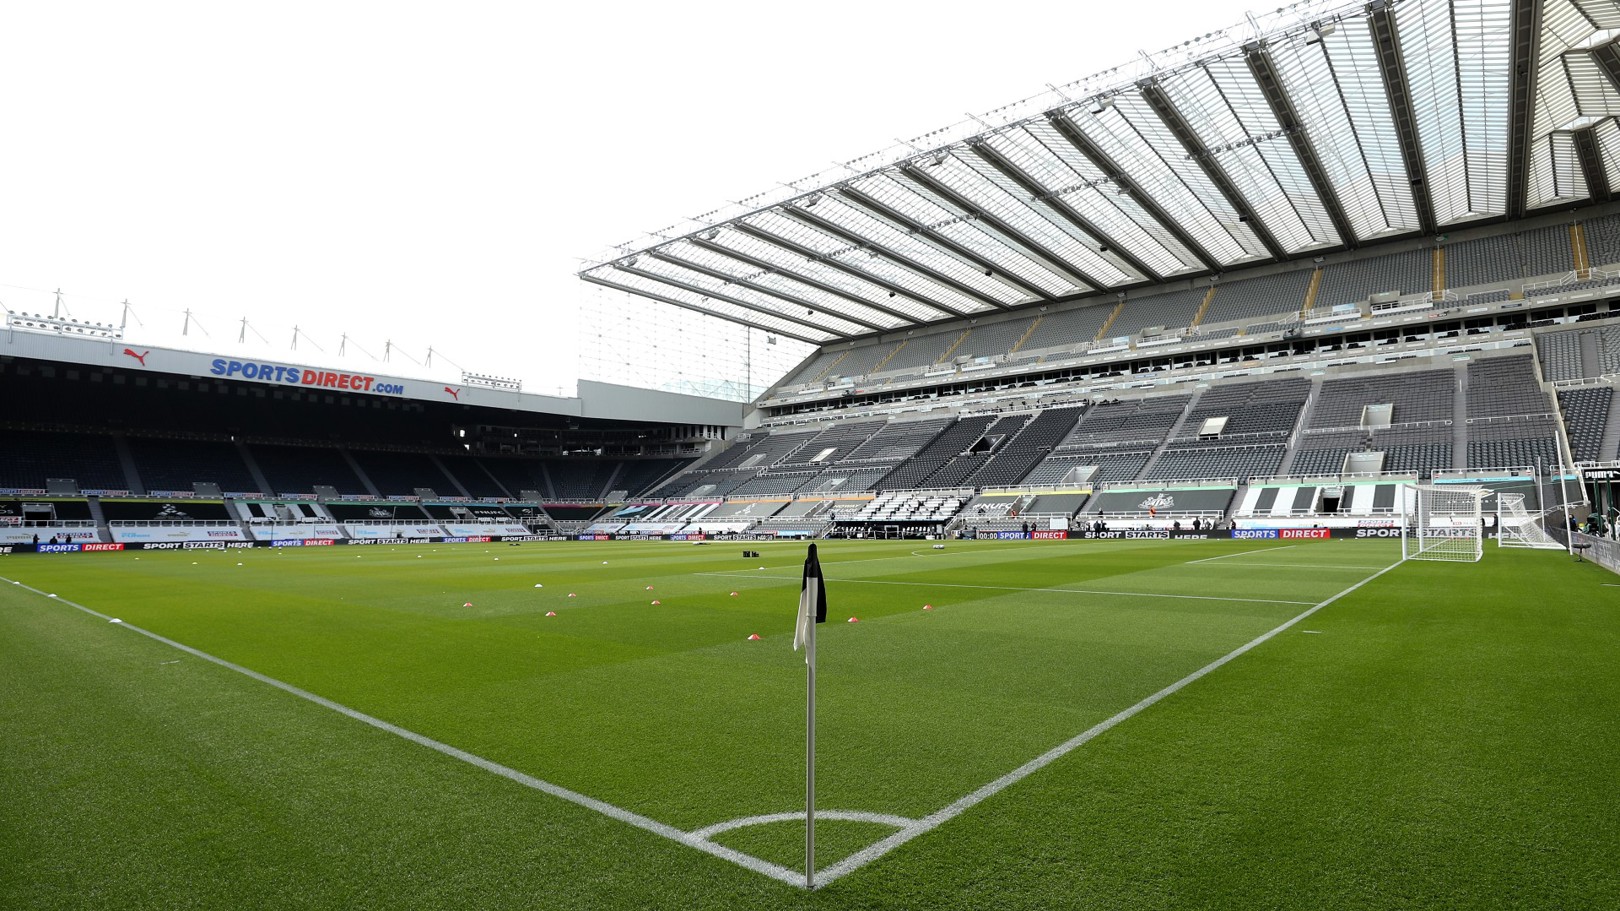 Newcastle United v City: SOLD OUT